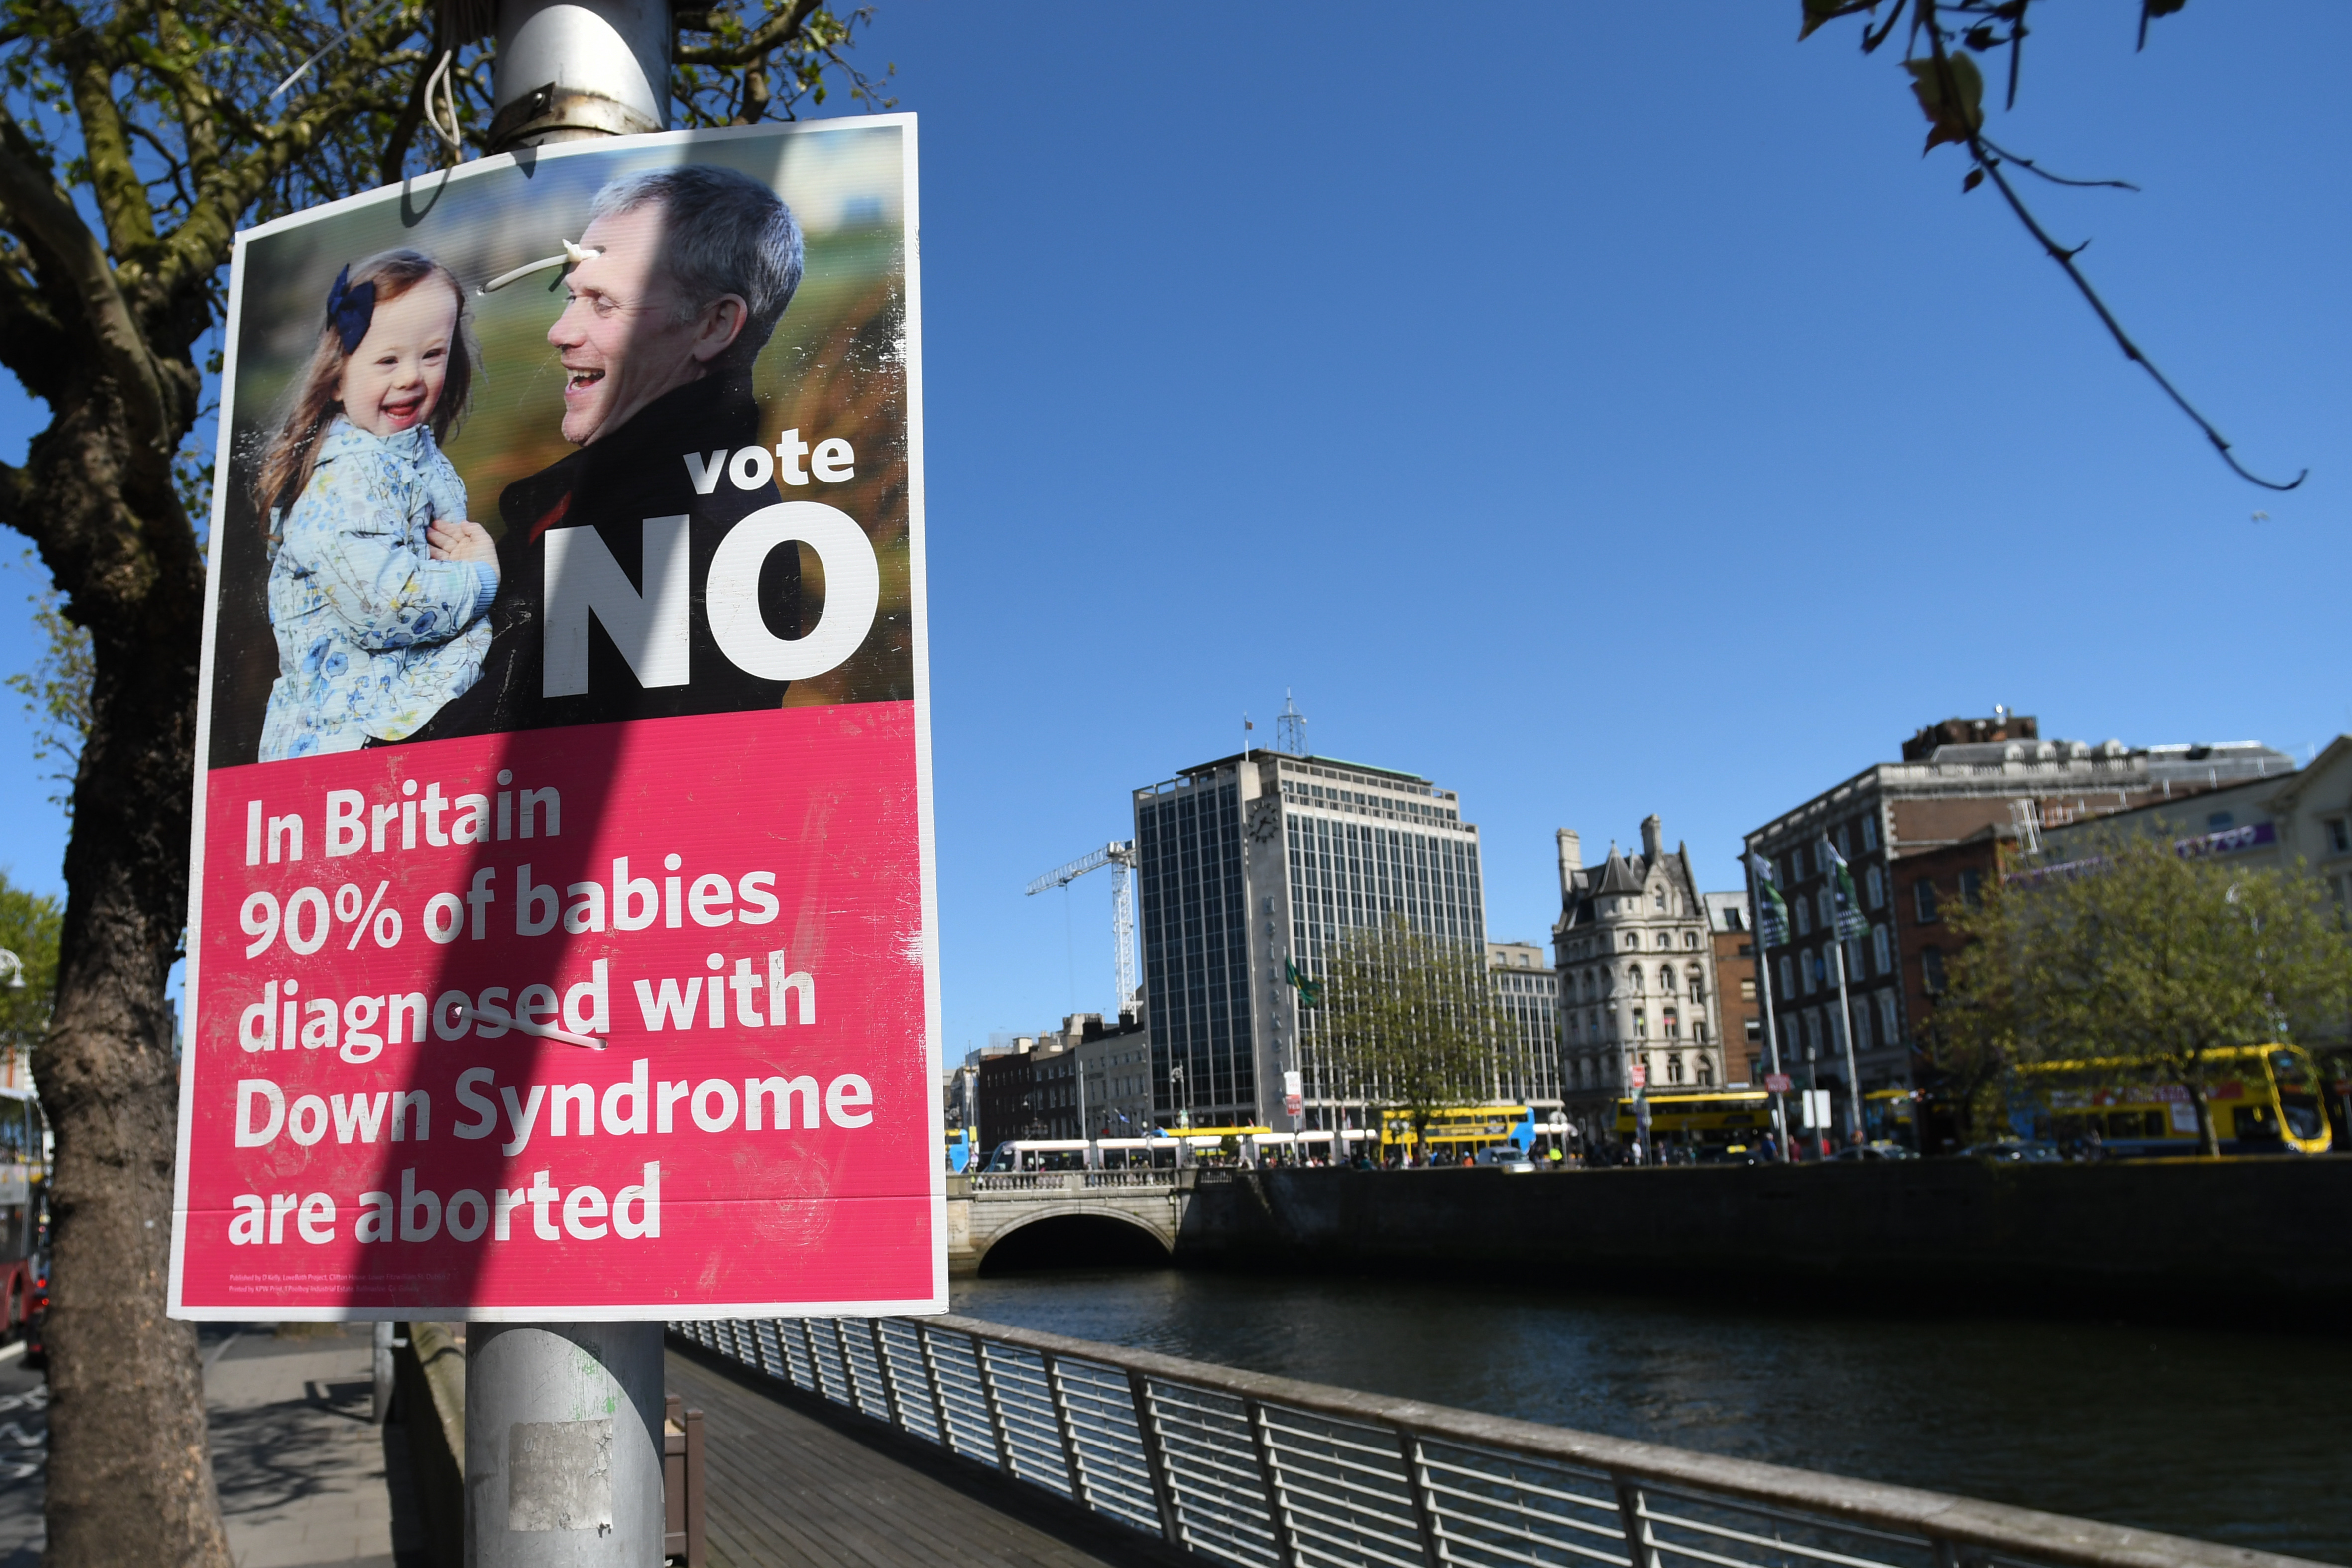 A poster calling for a 'NO' vote in the referendum to retain the eighth amendment of the Irish constitution seen near Liffey river, in Dublin's City Center on May 16, 2018. (Artur Widak—NurPhoto via Getty Images)